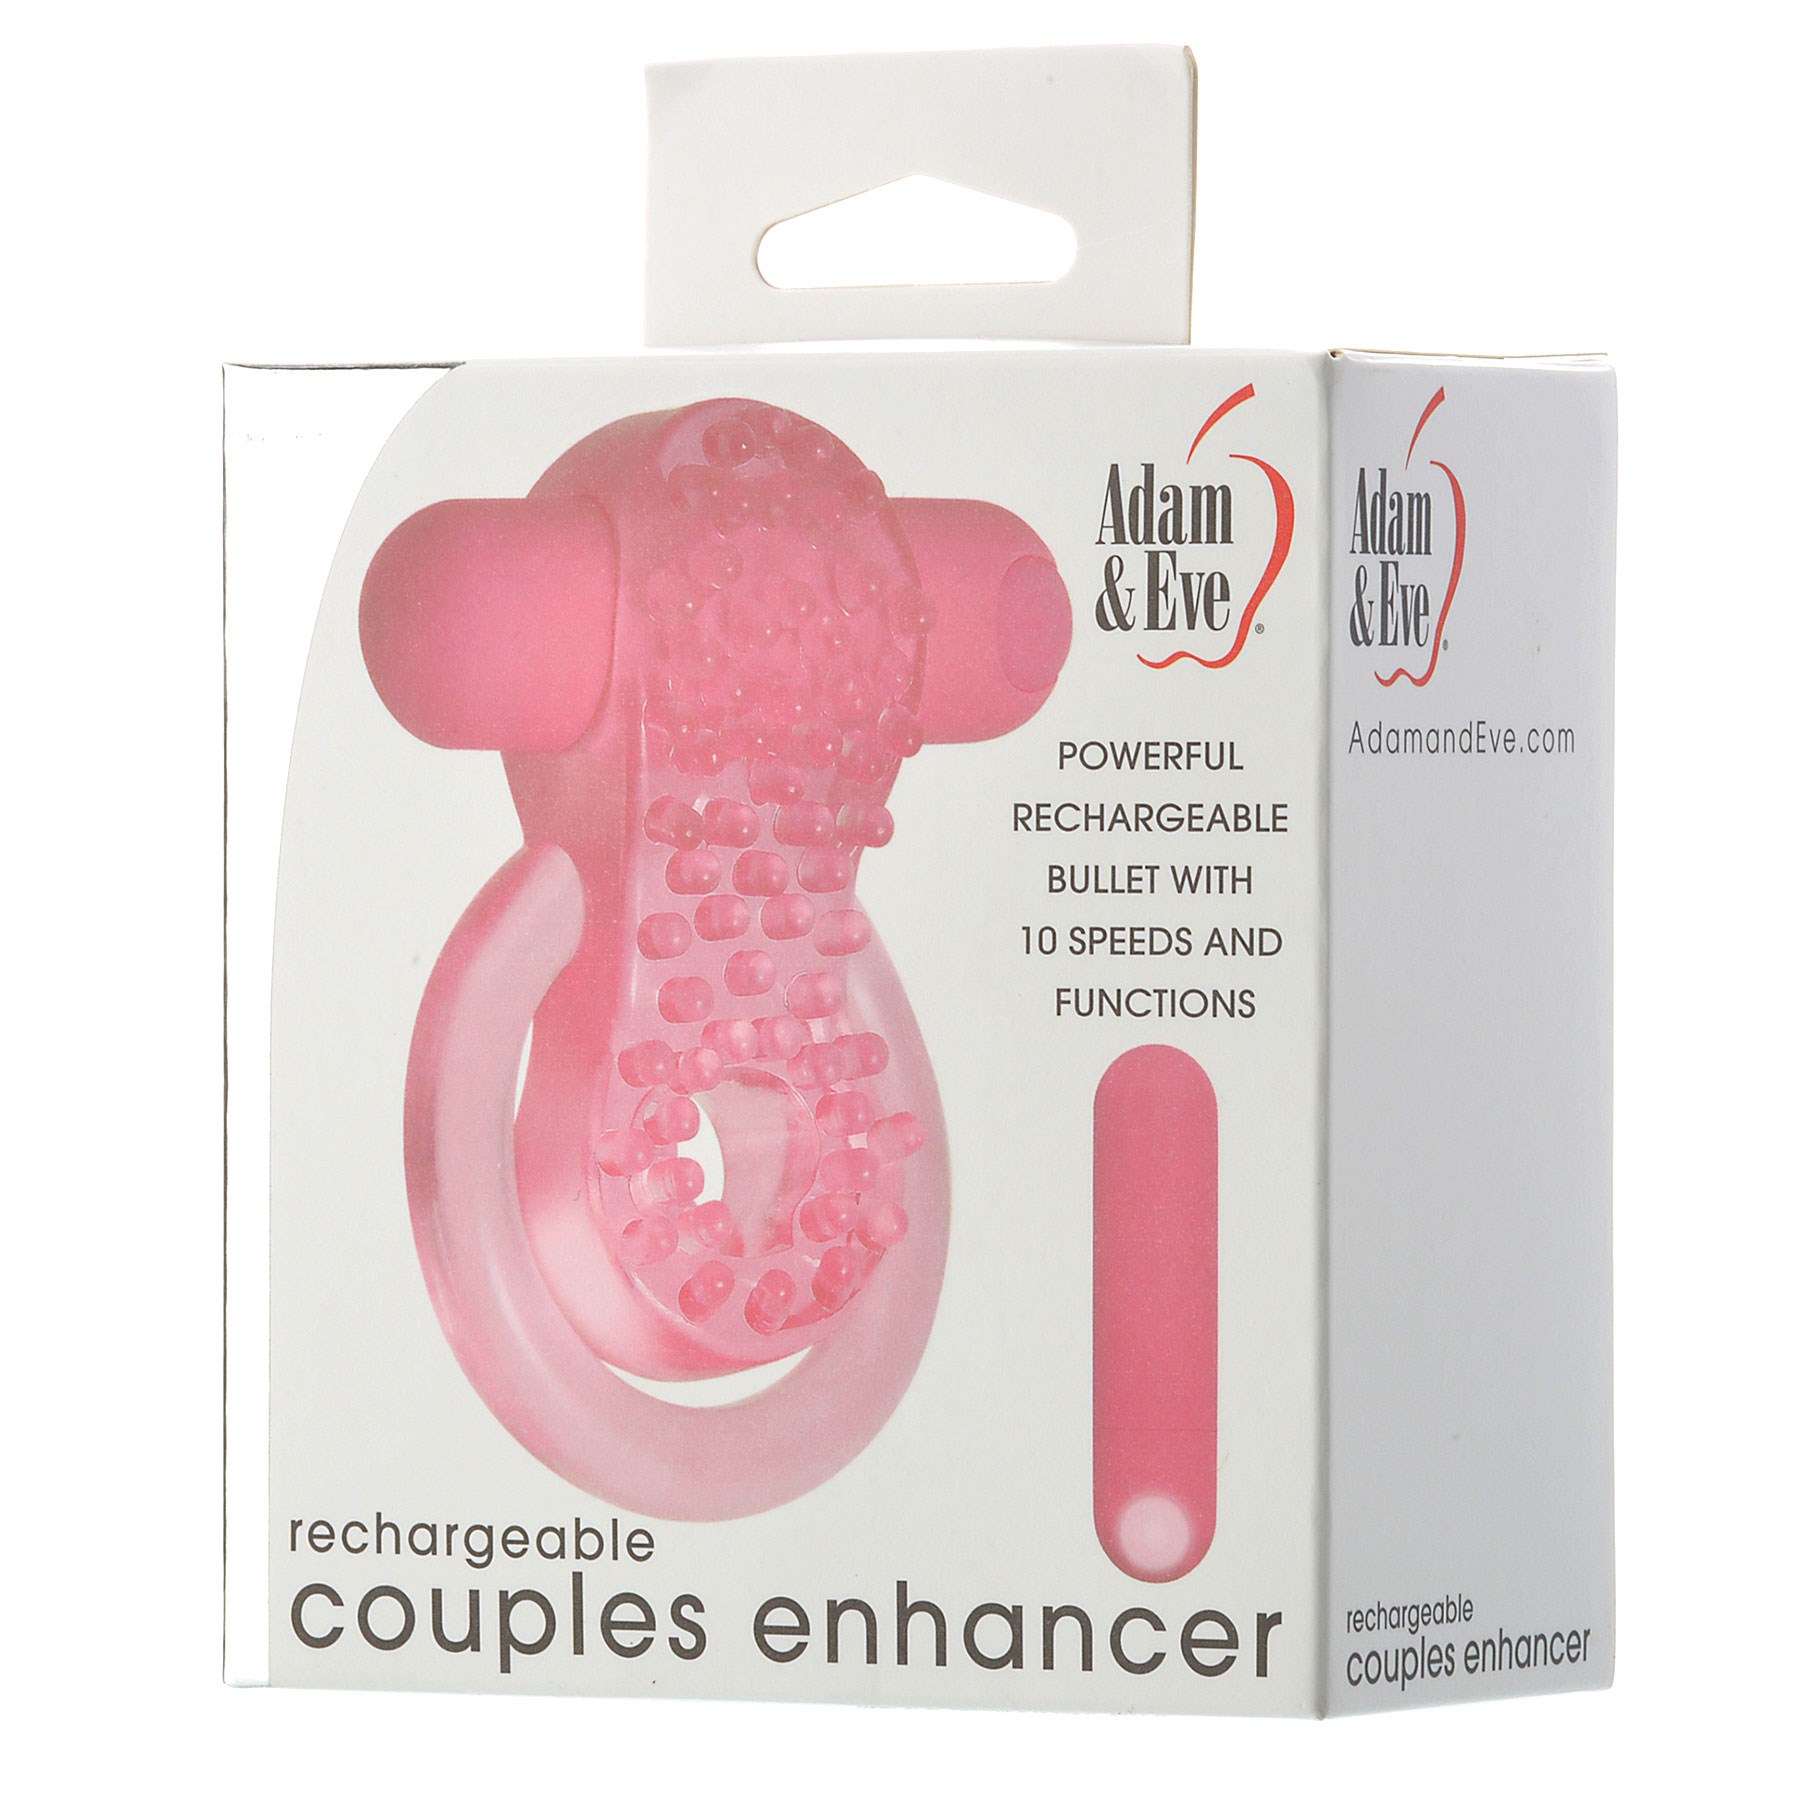 Adam & Eve Rechargeable Couples Enhancer Ring in box